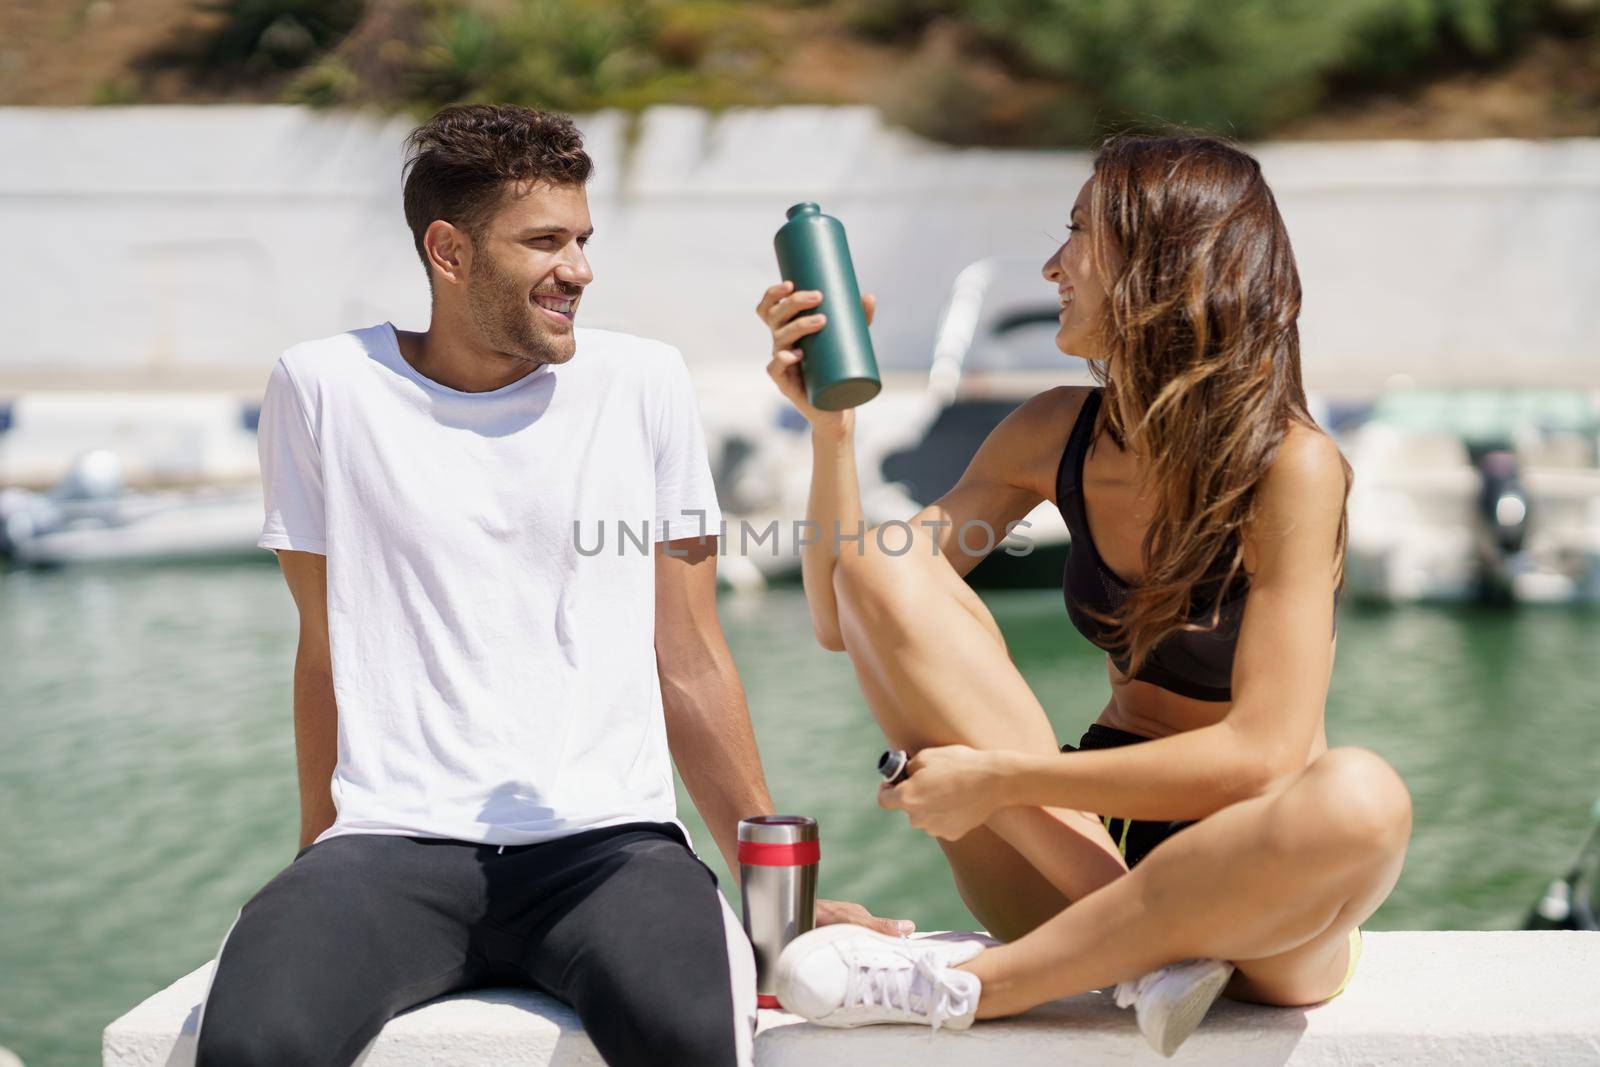 Young fitness people hydrate themselves with water in metal bottles while taking a break after sport.